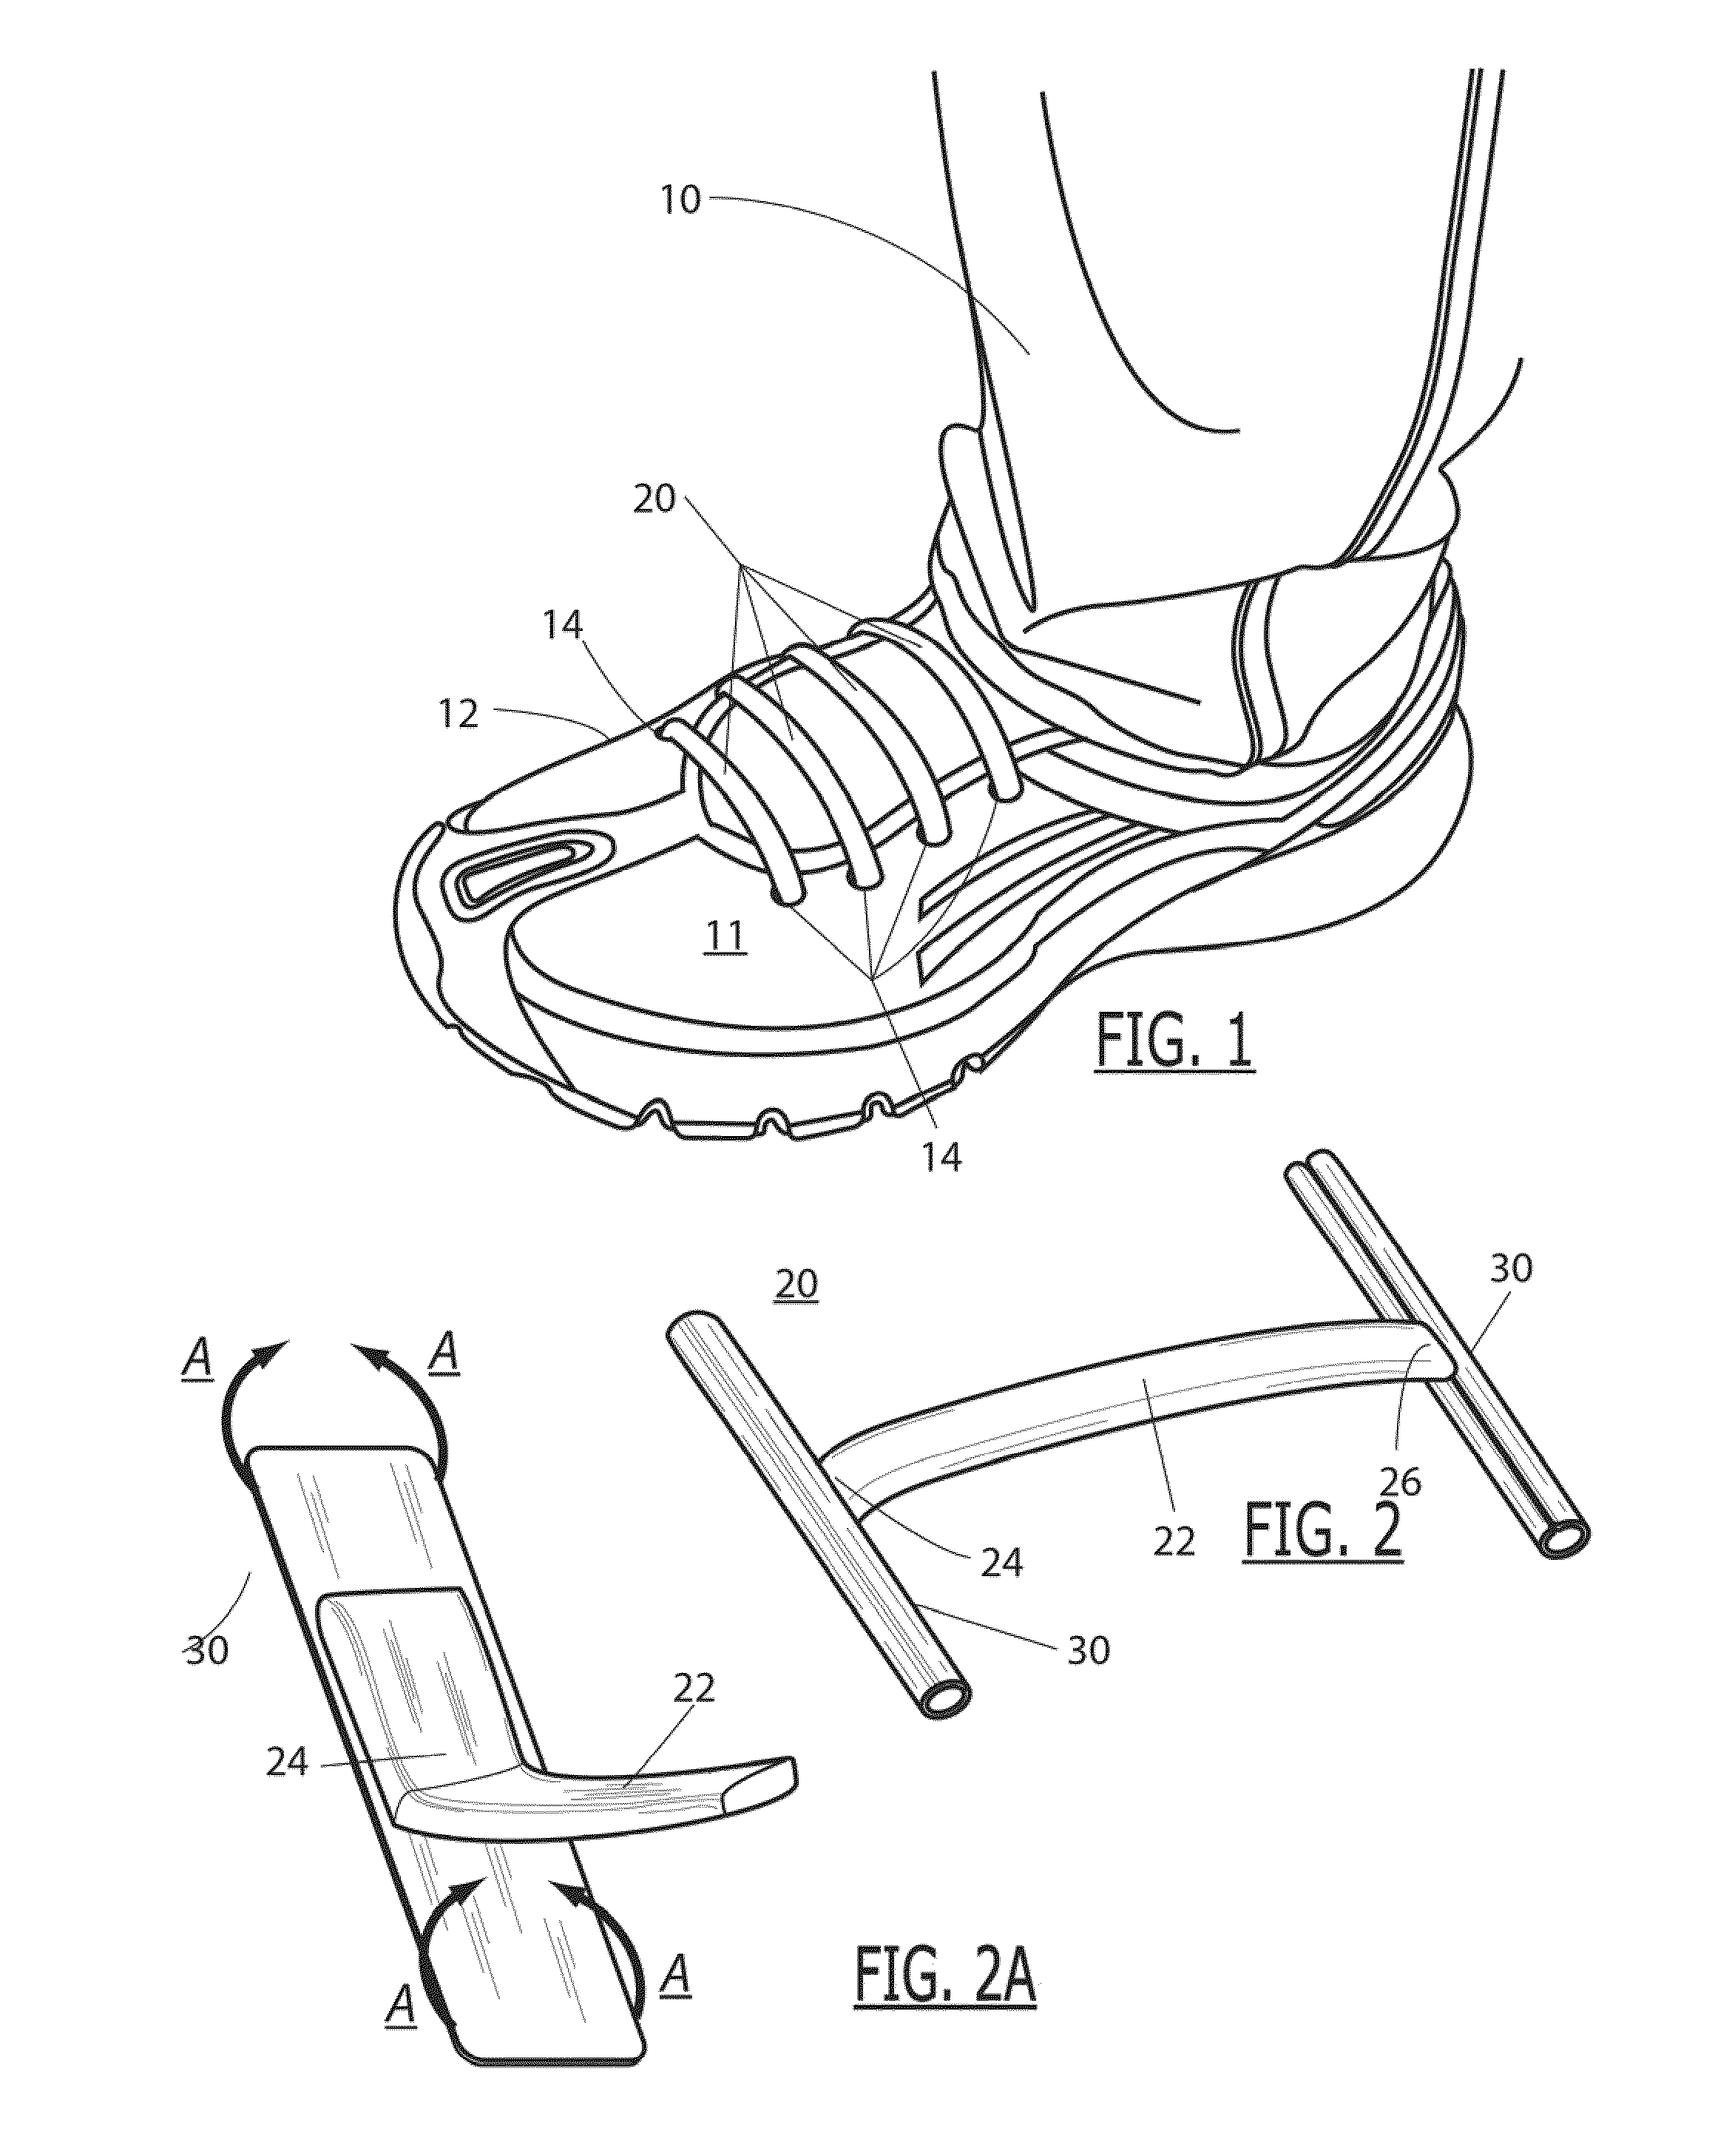 Shoelace replacement system and method